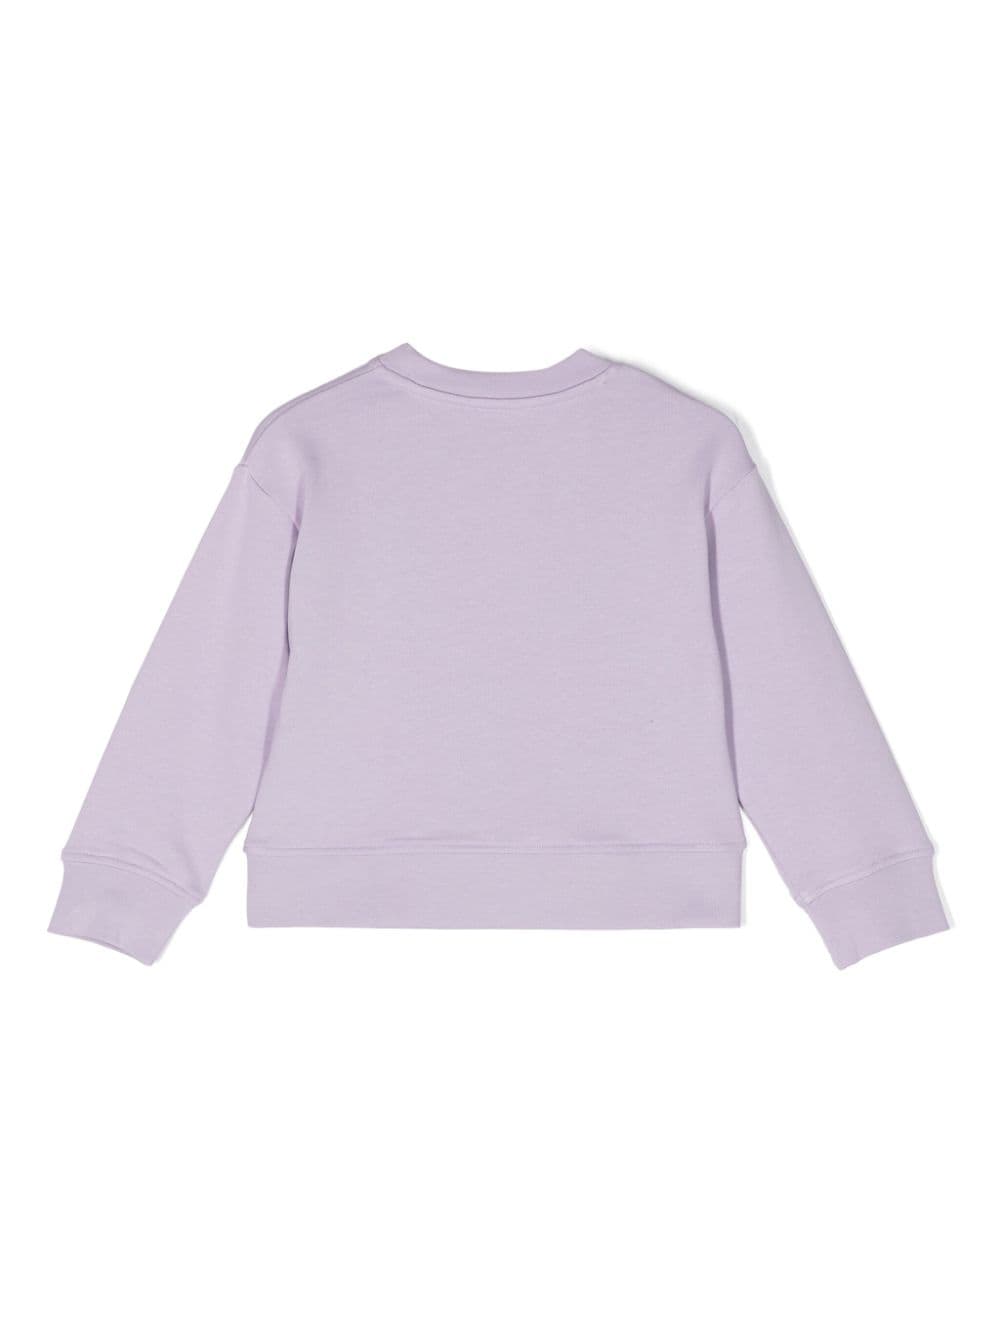 Lilac sweatshirt for girls with print